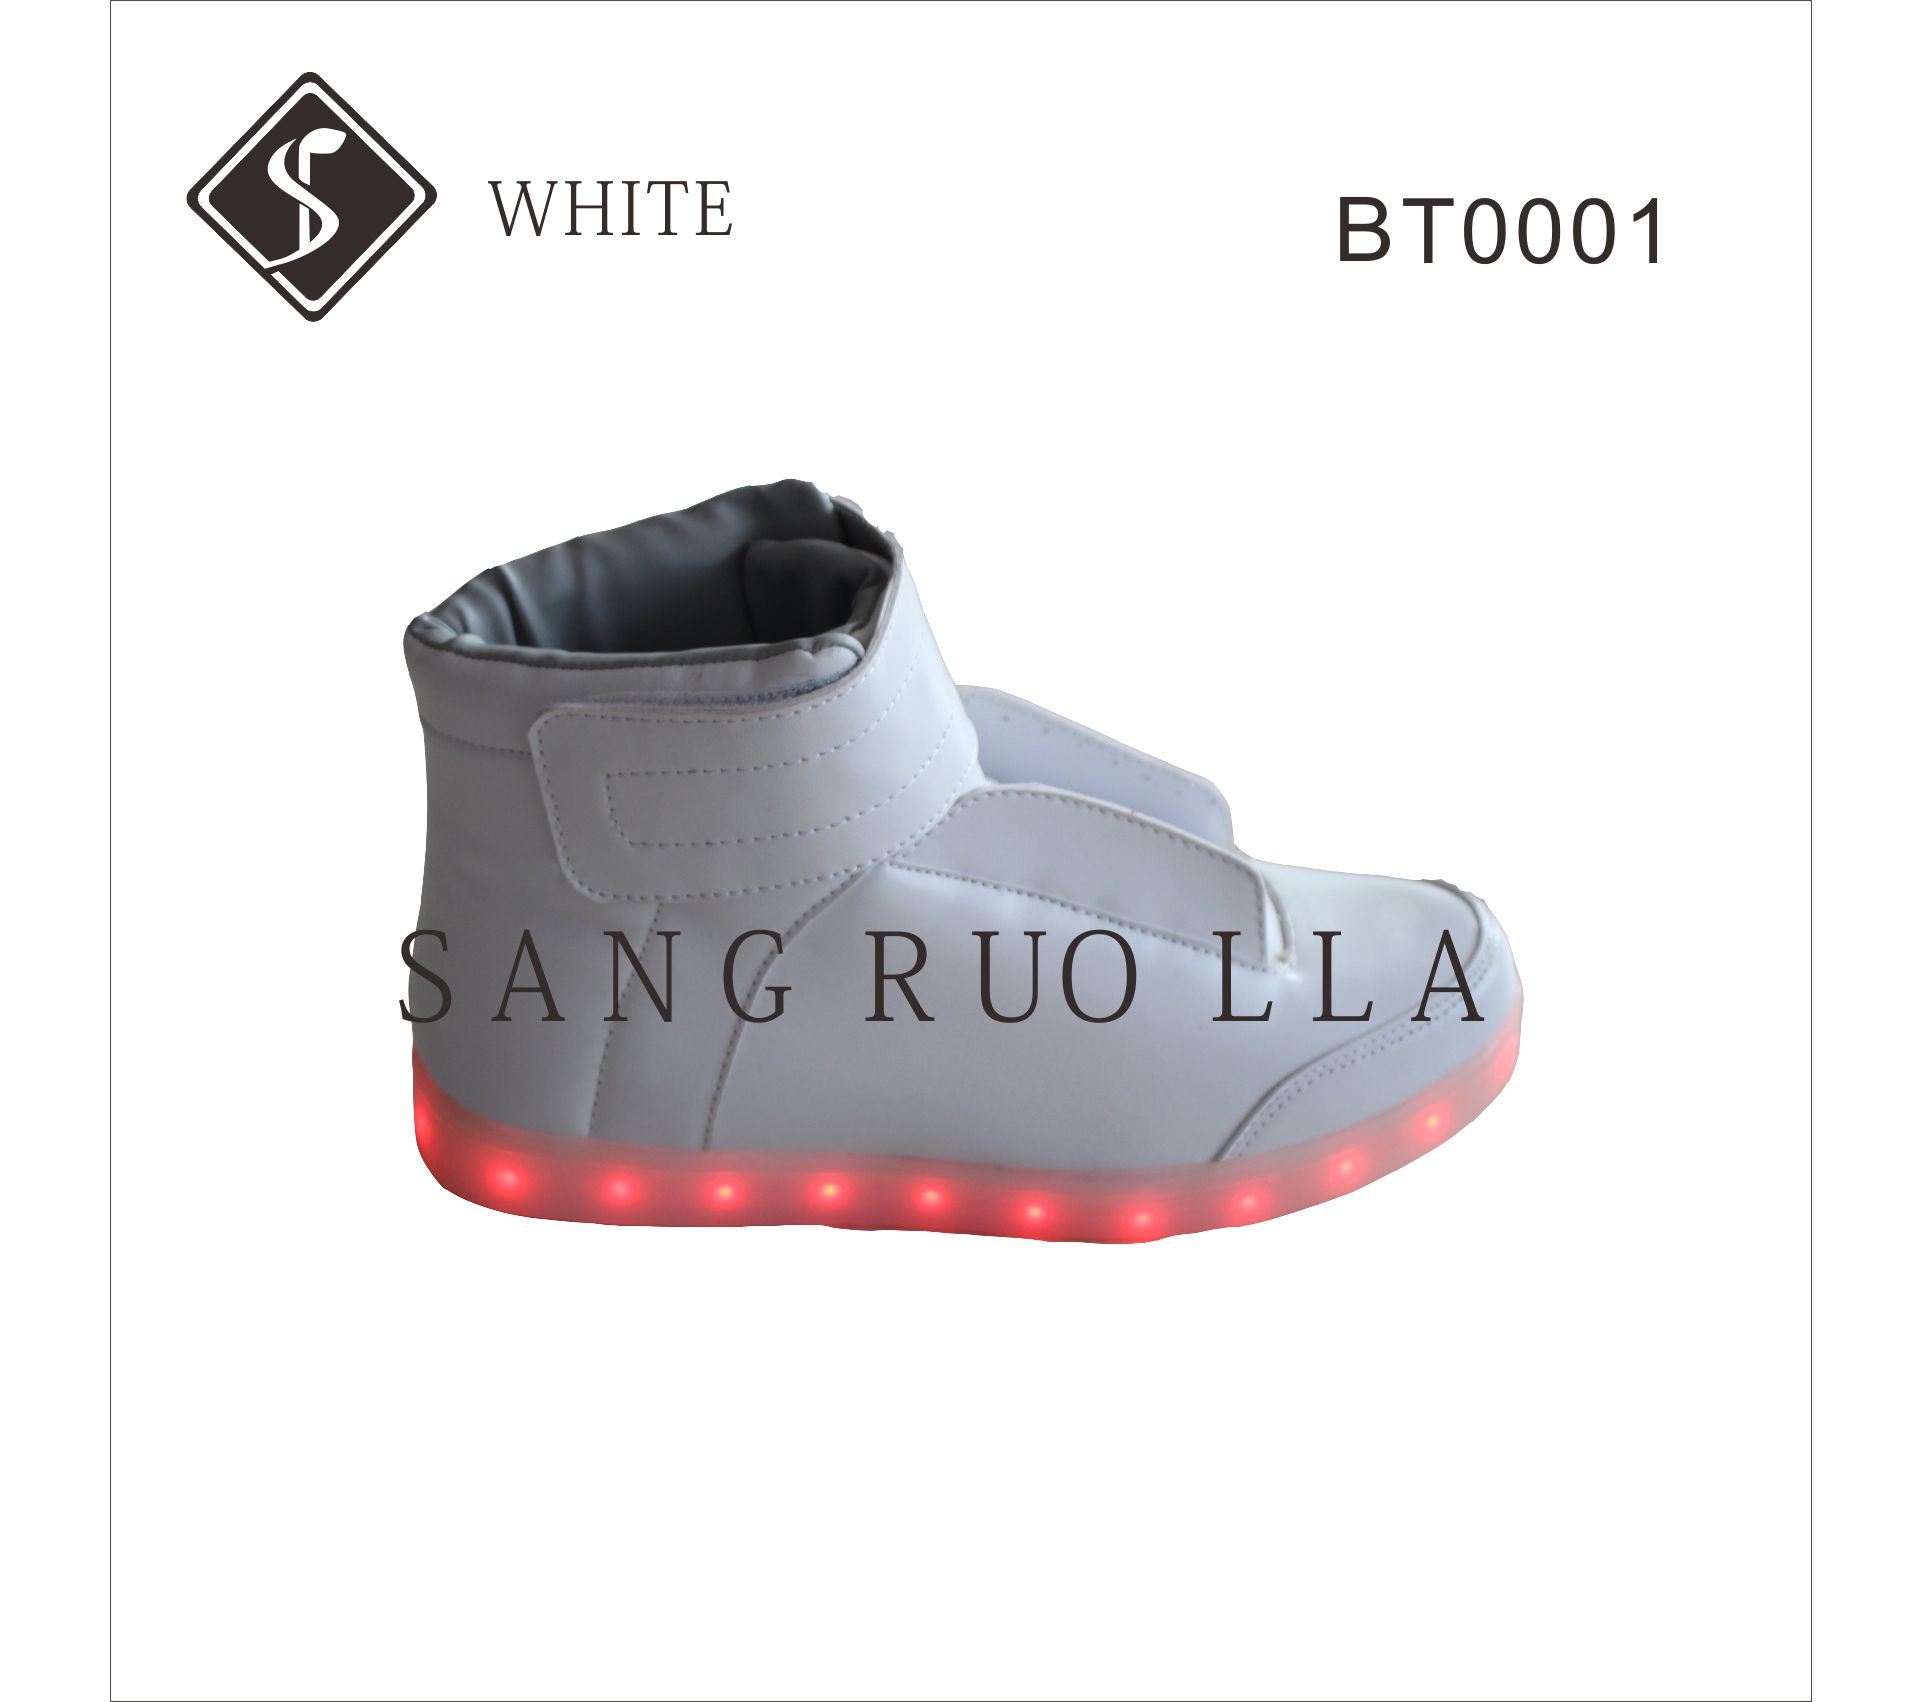 Charging Lamp Luminous LED with Light Shoes